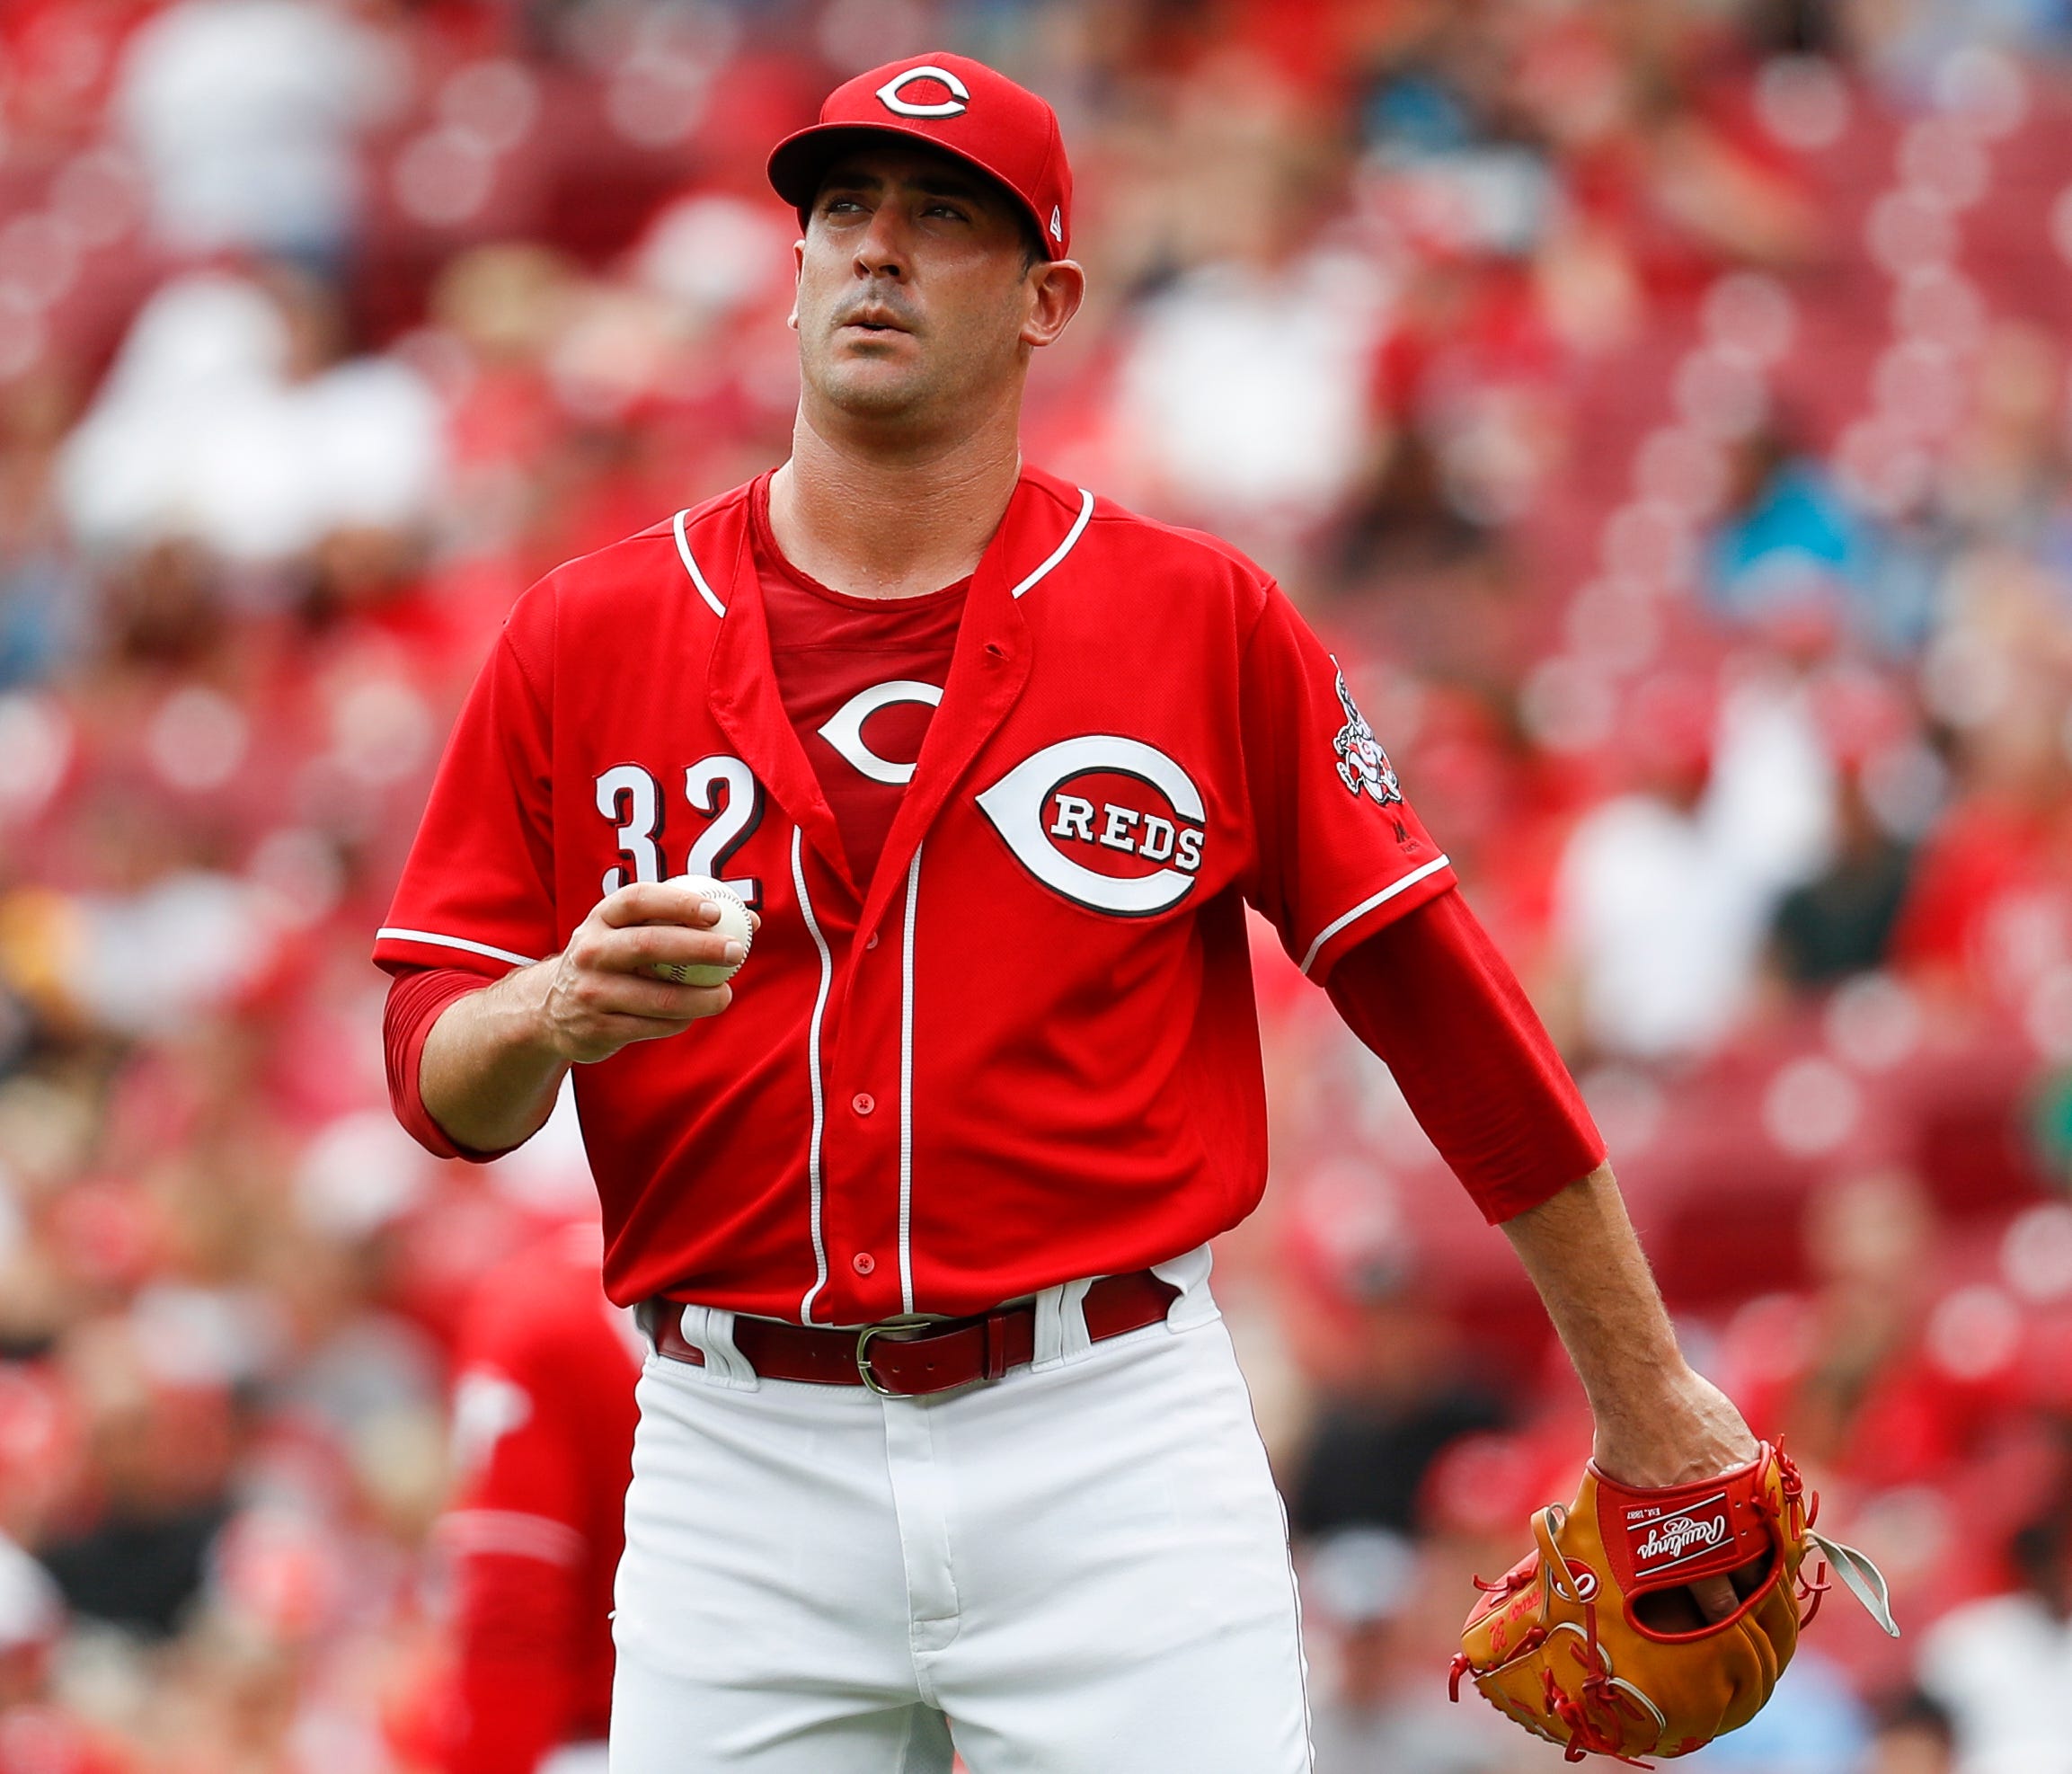 Cincinnati Reds starting pitcher Matt Harvey reacts after giving up a solo home run to Pittsburgh Pirates' Starling Marte in the second inning of a baseball game, Sunday, July 22, 2018, in Cincinnati. (AP Photo/John Minchillo)